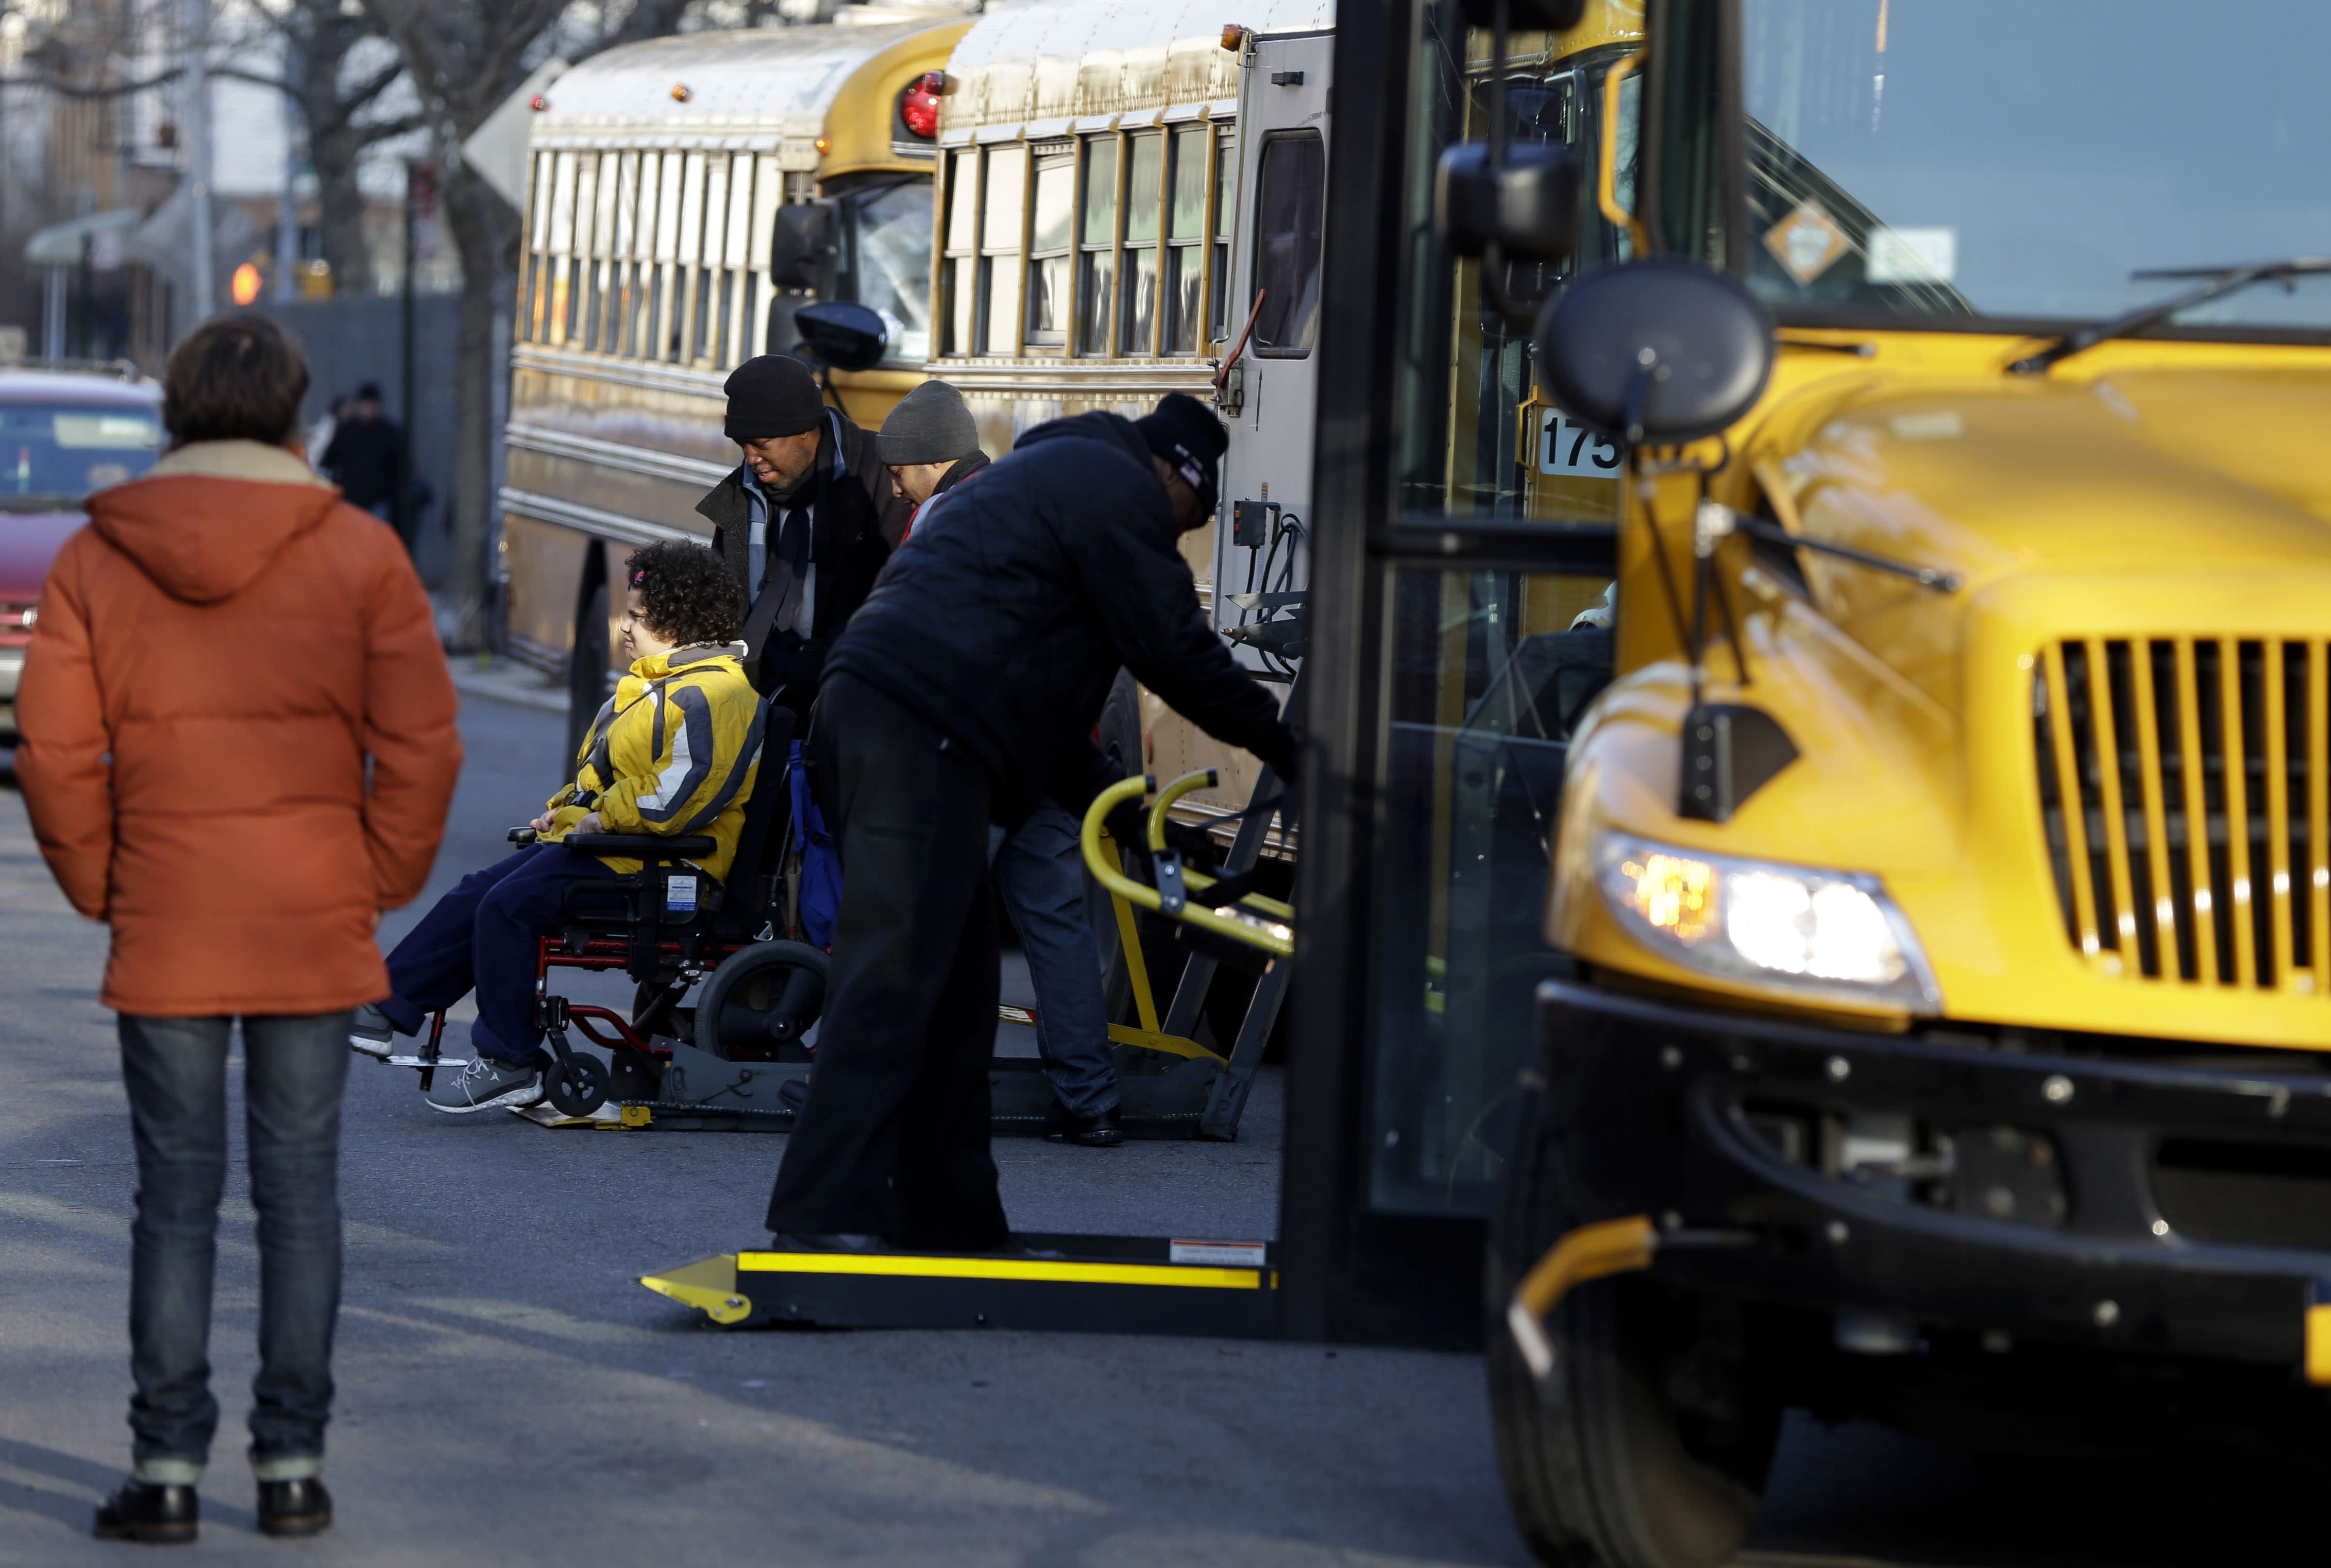 NYC school bus service resumes after strike